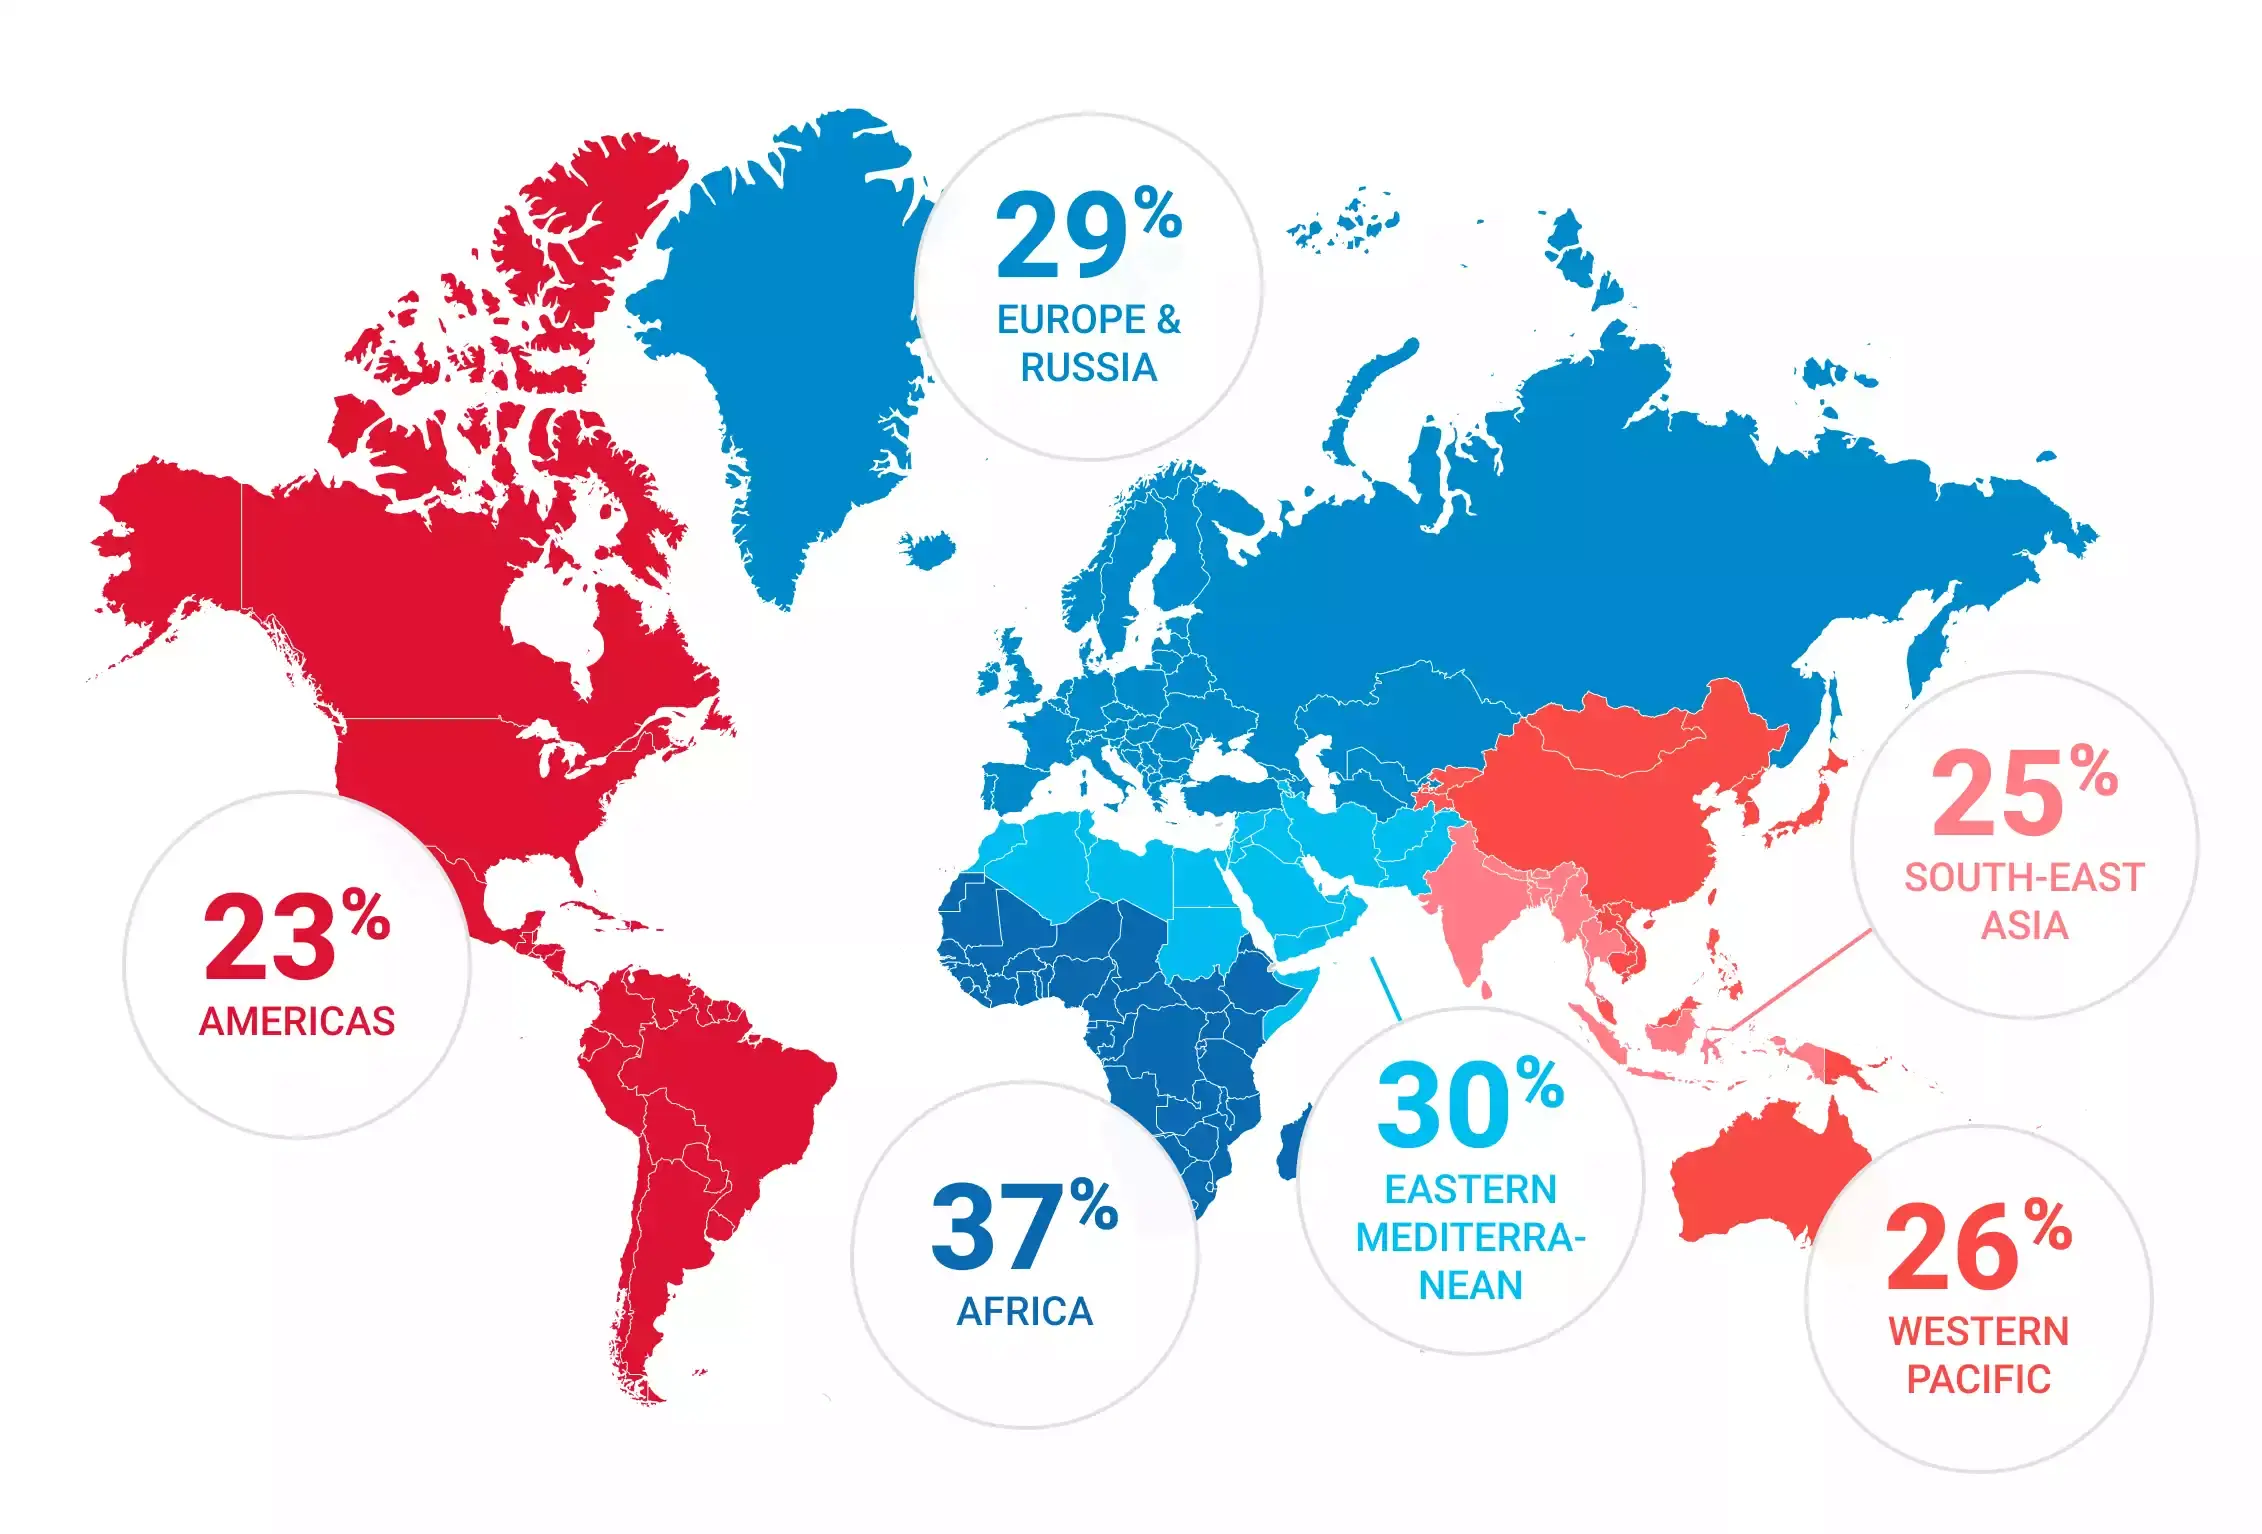 image showing worldwide hypertension problem on map